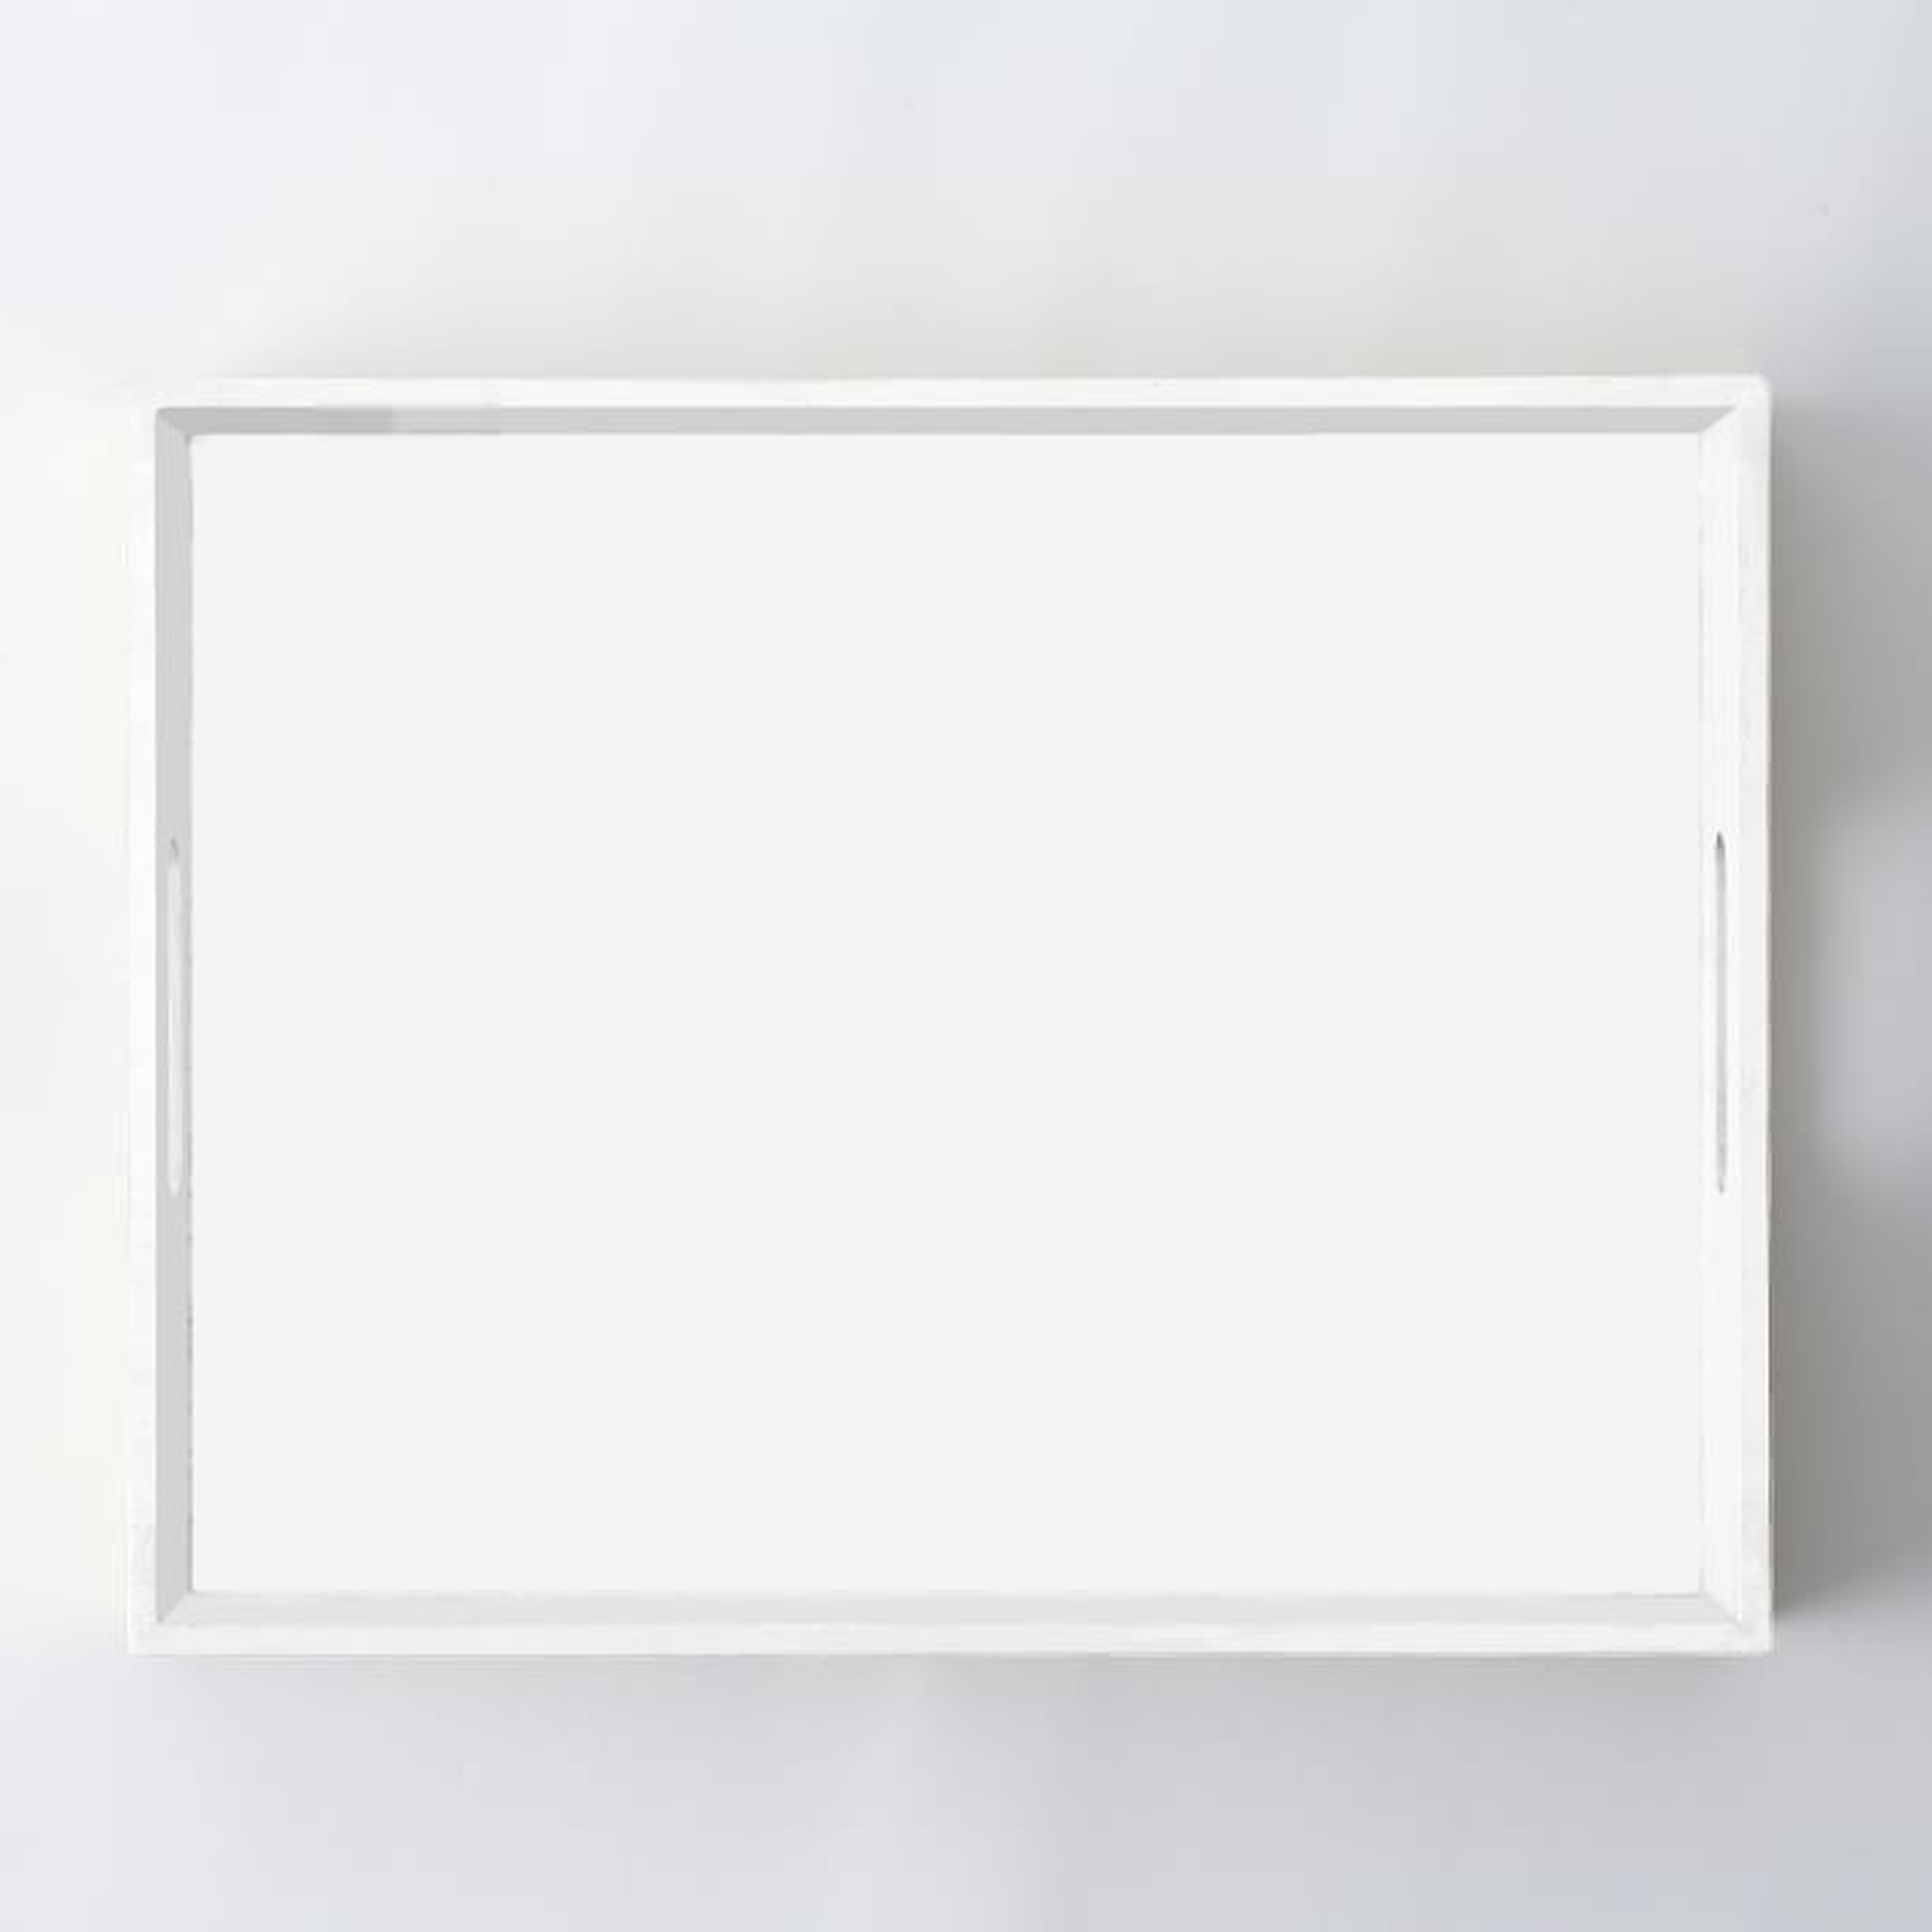 Small Rectangle Lacquer Tray, White - West Elm